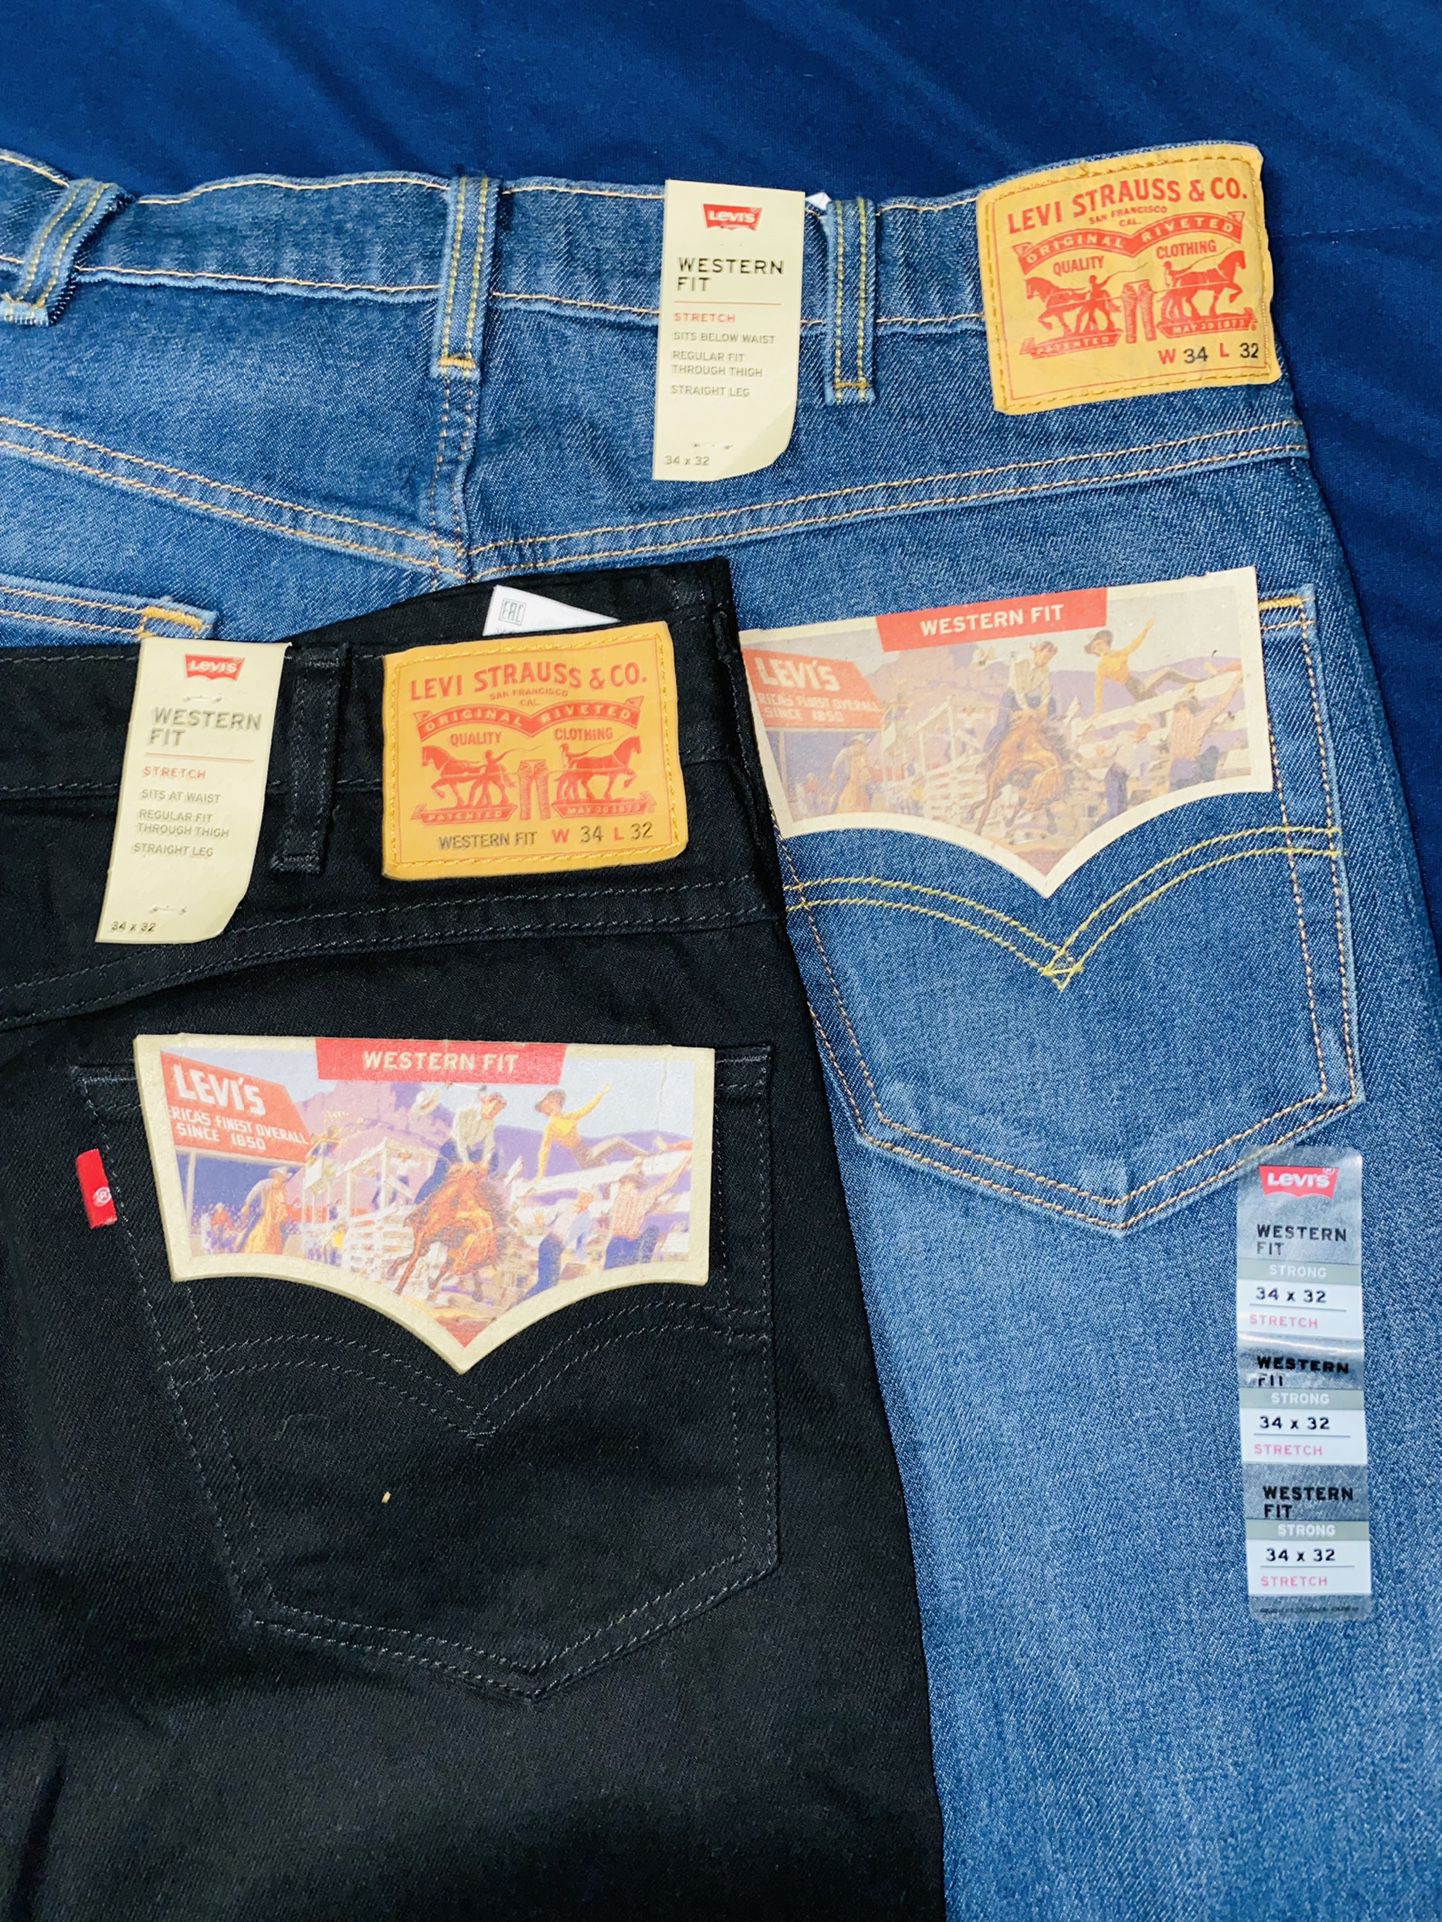 Levis Western Fit Jeans for Sale in Fort Worth, TX - OfferUp